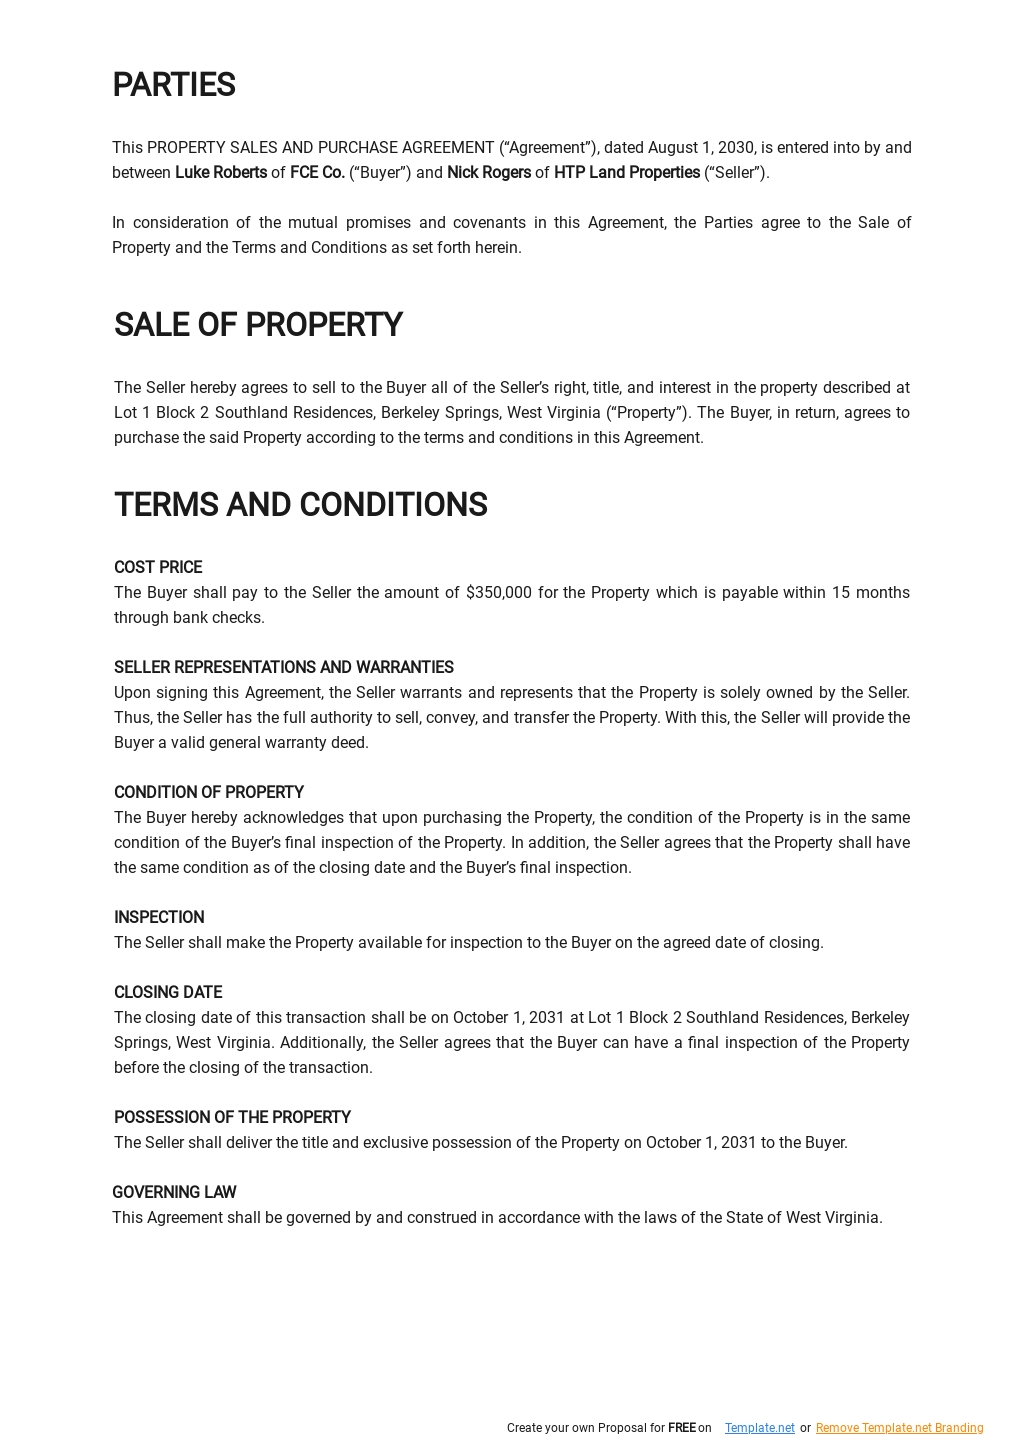 Property Sales and Purchase Agreement Template 1.jpe